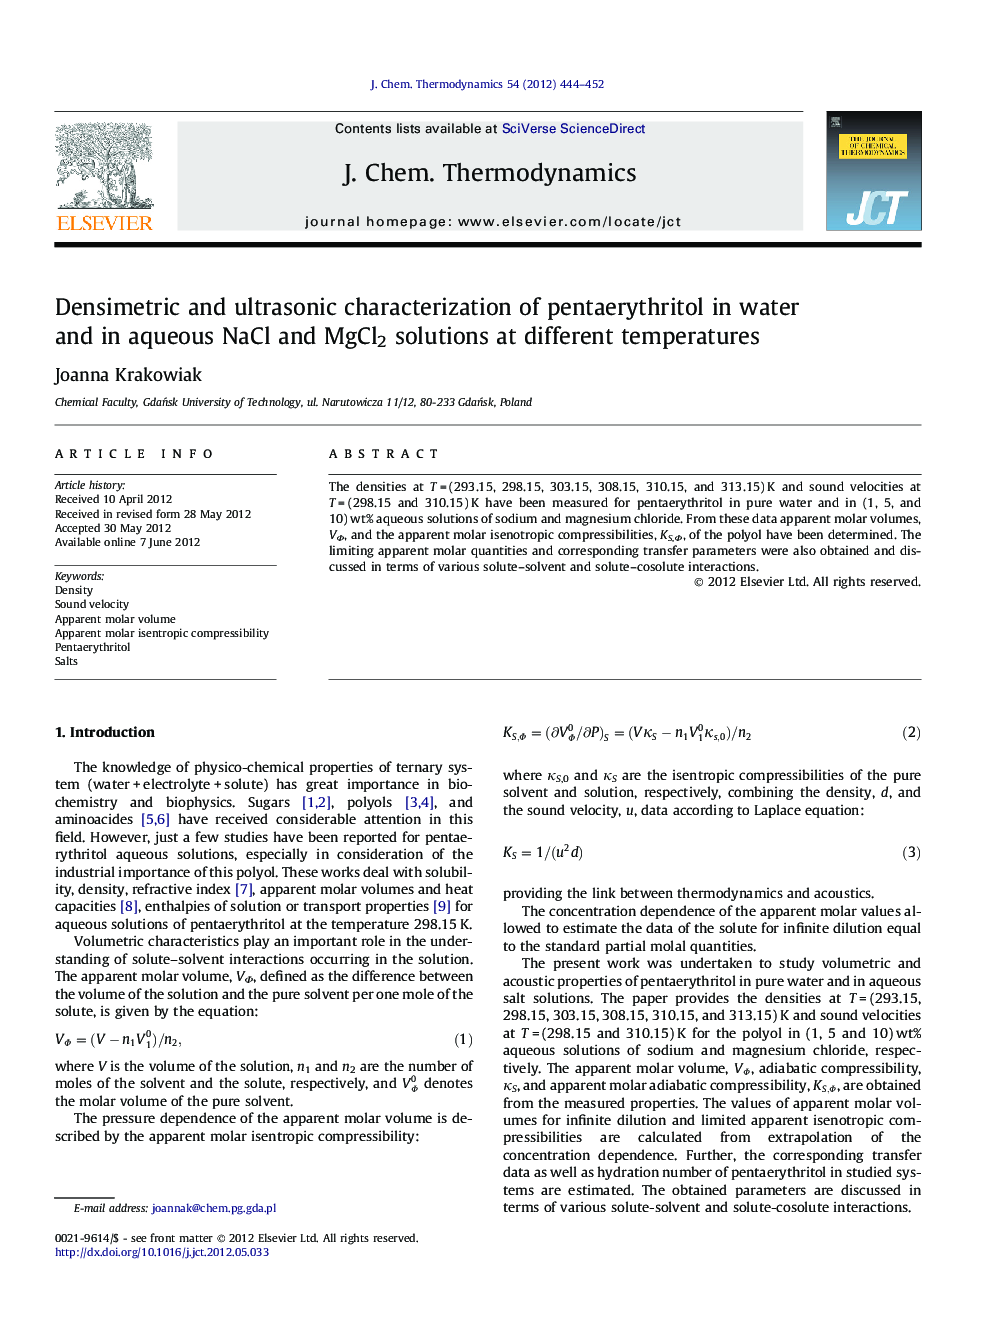 Densimetric and ultrasonic characterization of pentaerythritol in water and in aqueous NaCl and MgCl2 solutions at different temperatures